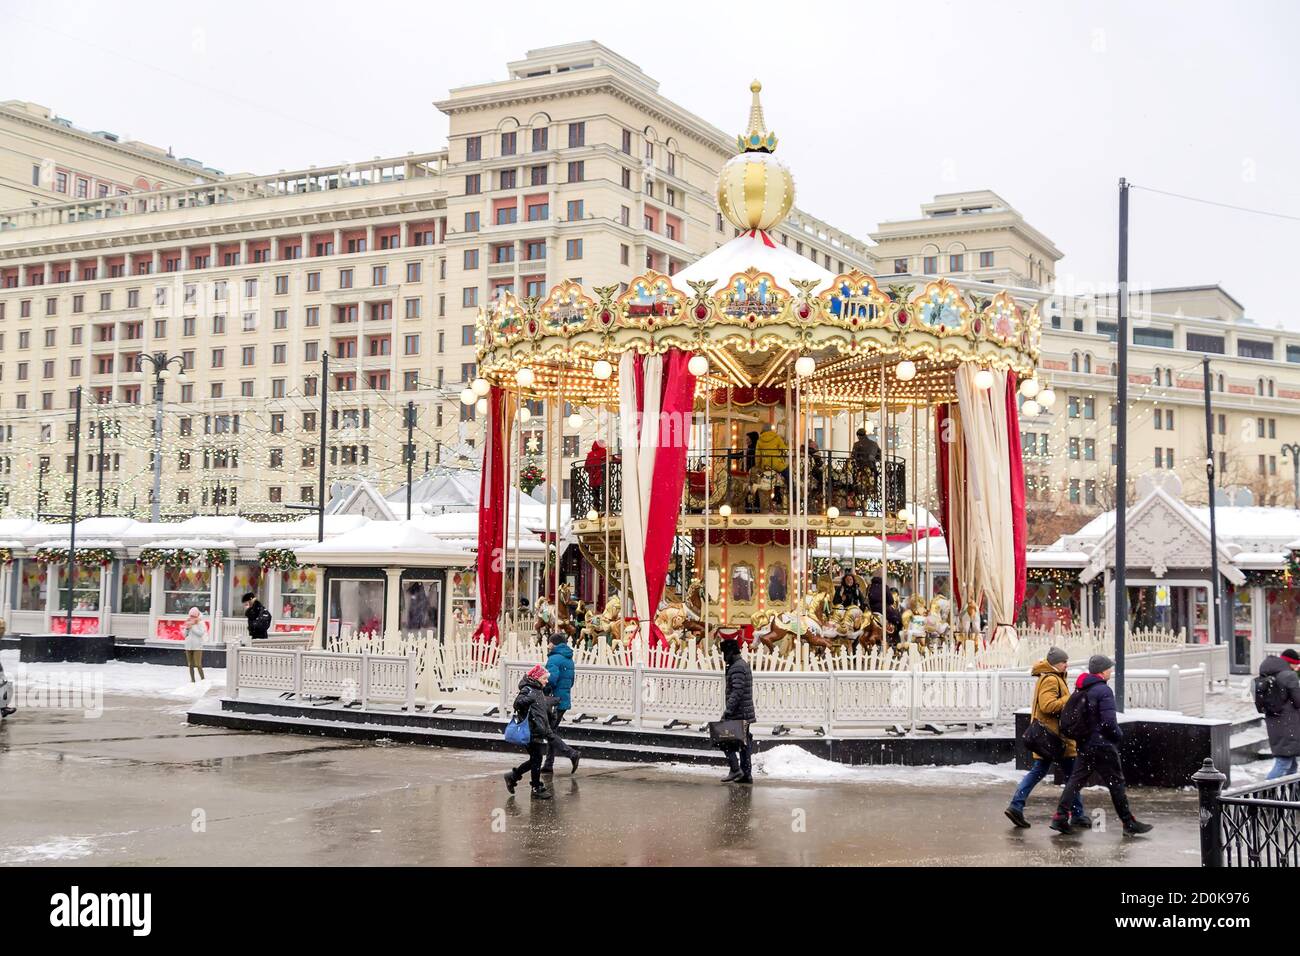 Moscow, Russia - December 20, 2018: colorful merry go round on christmass and new year holidays. Festive Manezhnaya Square and christms fair Stock Photo